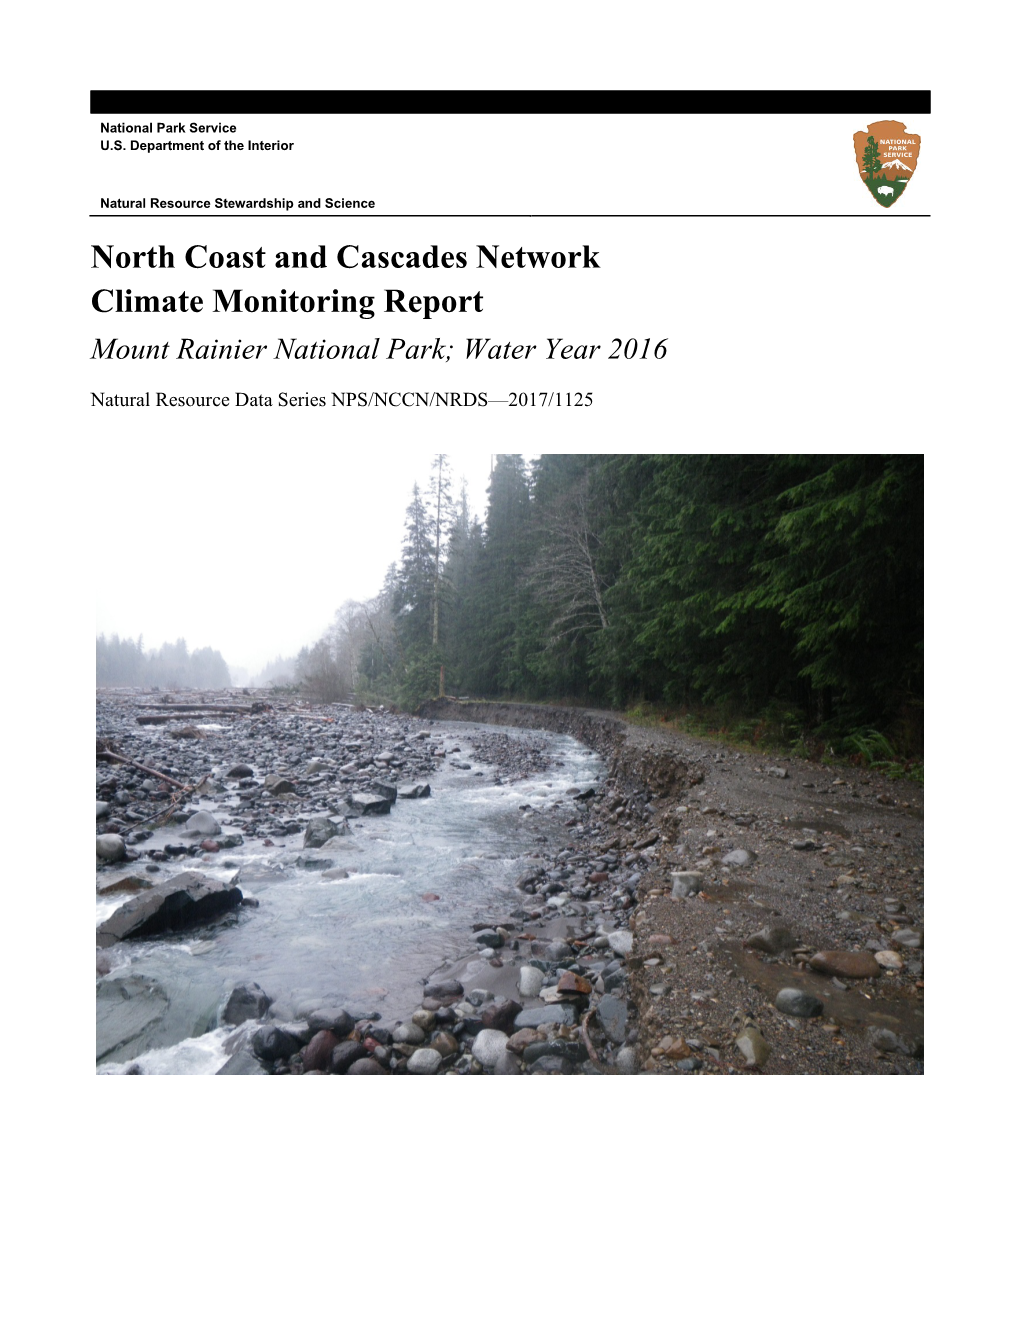 North Coast and Cascades Network Climate Monitoring Report Mount Rainier National Park; Water Year 2016